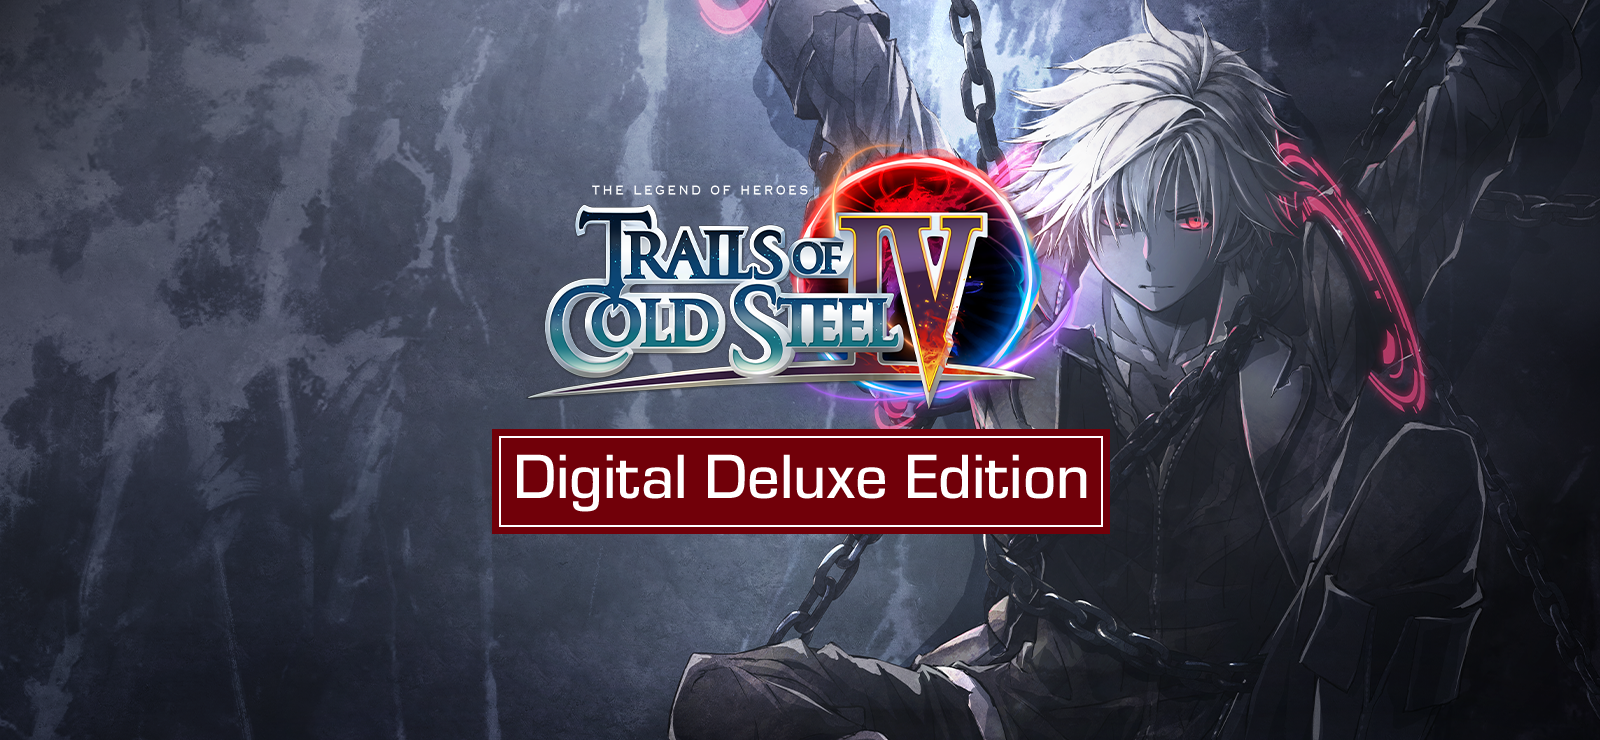 The Legend Of Heroes: Trails Of Cold Steel IV Digital Deluxe Edition